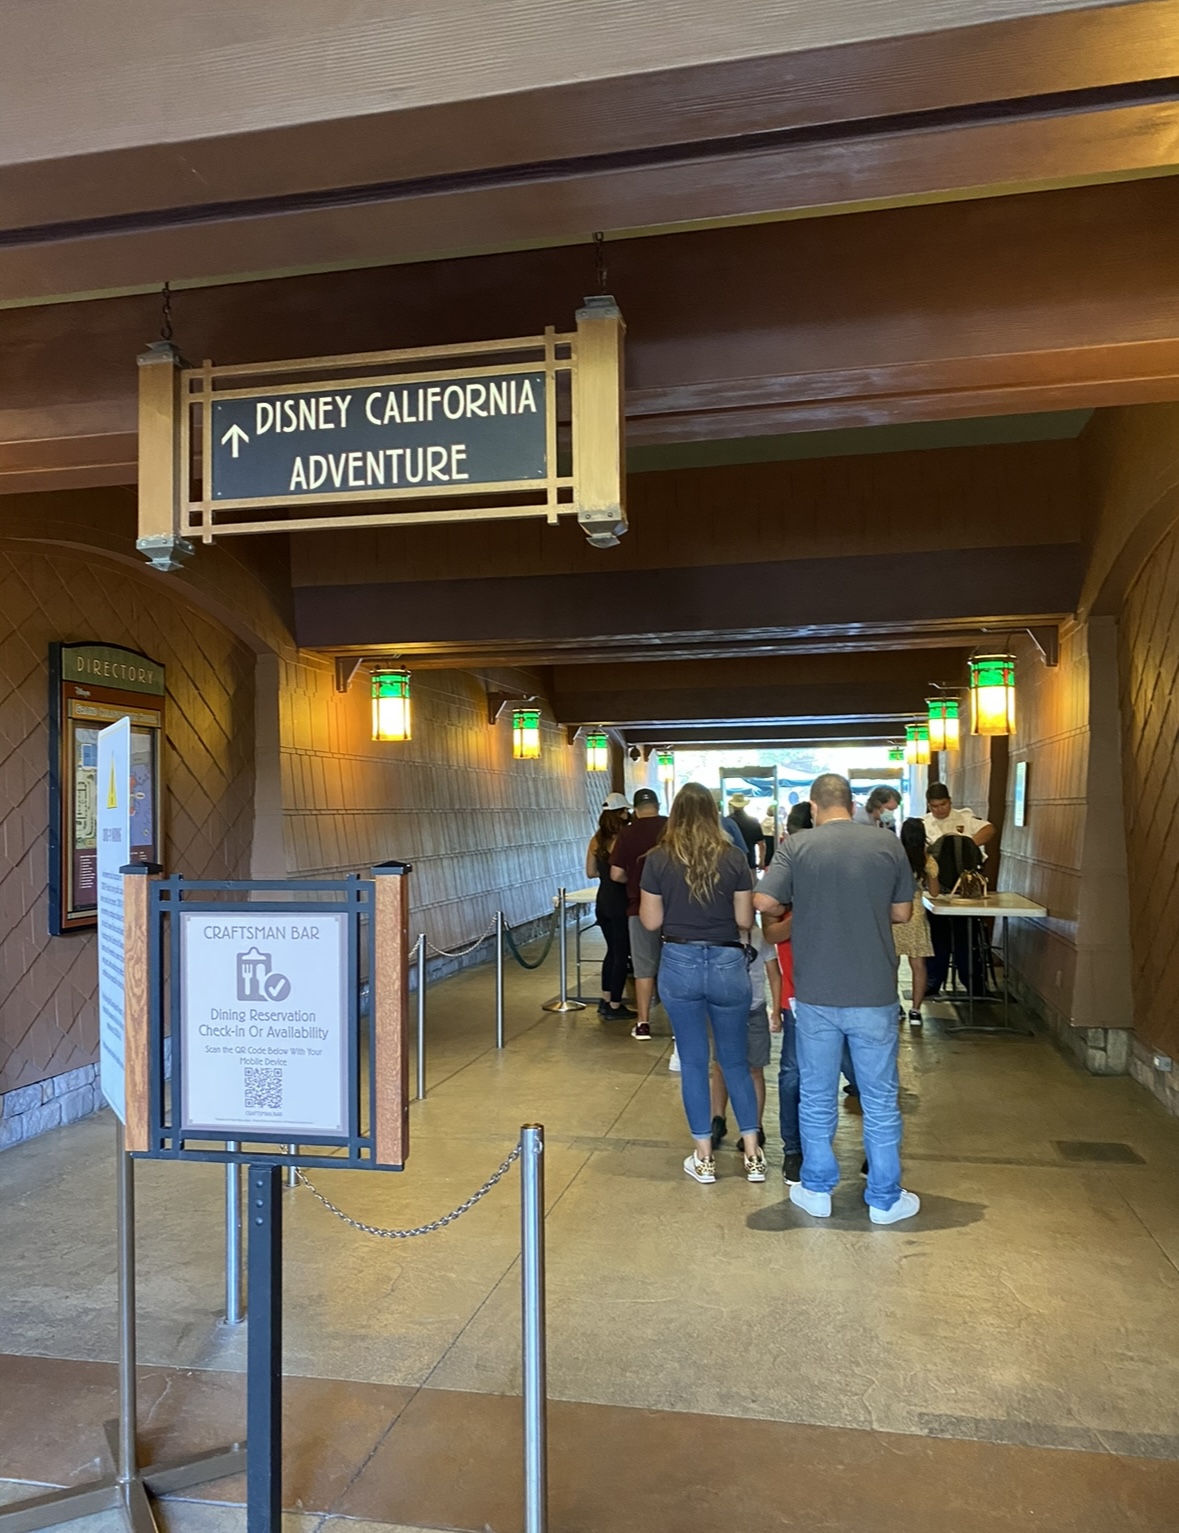 Entrance in and out of Disney California Adventure from the Grand Californian hotel.